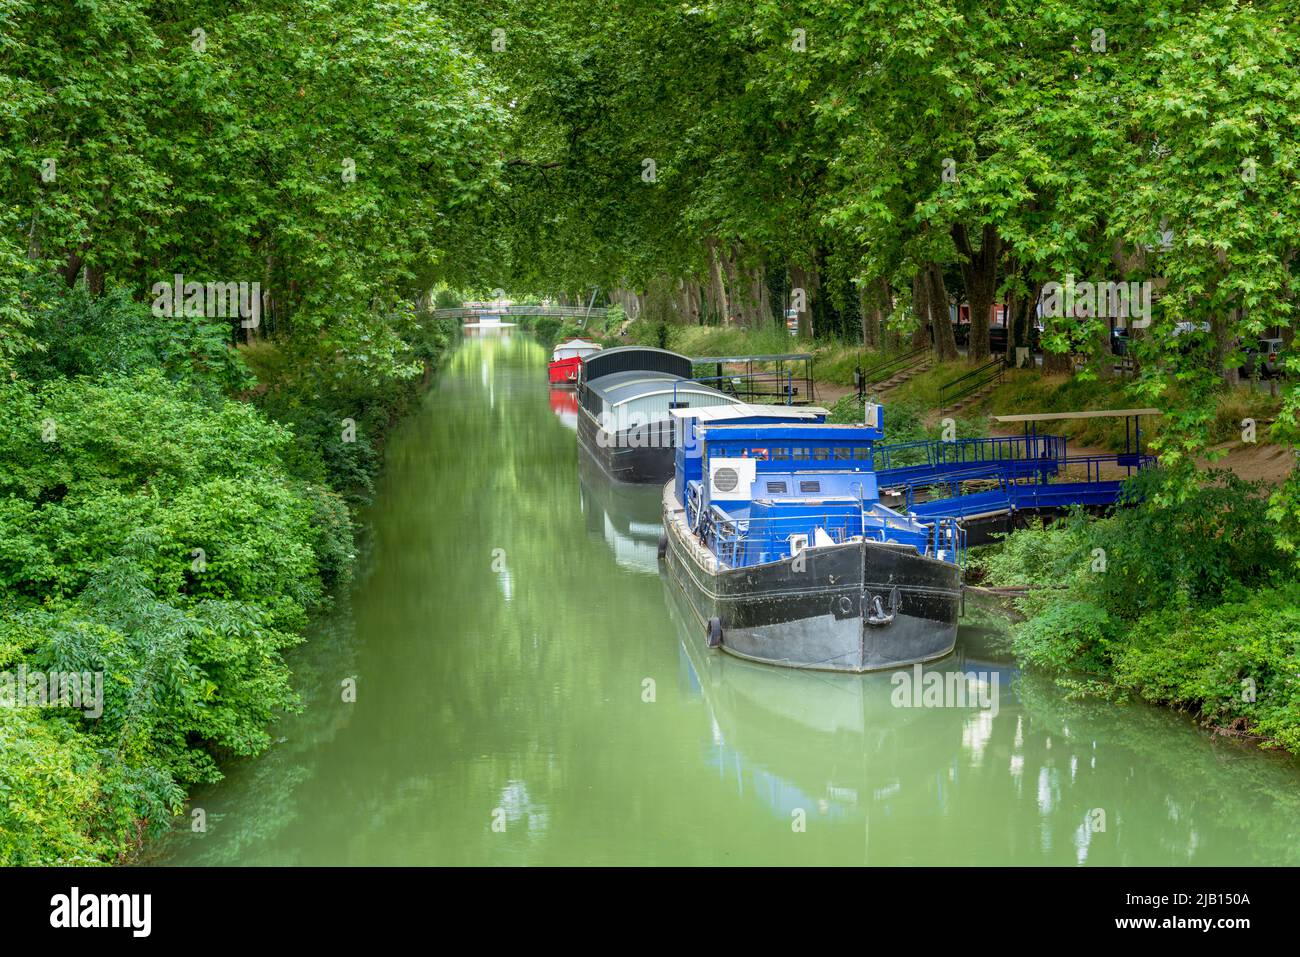 Scenic view of Canal de Brienne with barges moored, Toulouse France Stock Photo